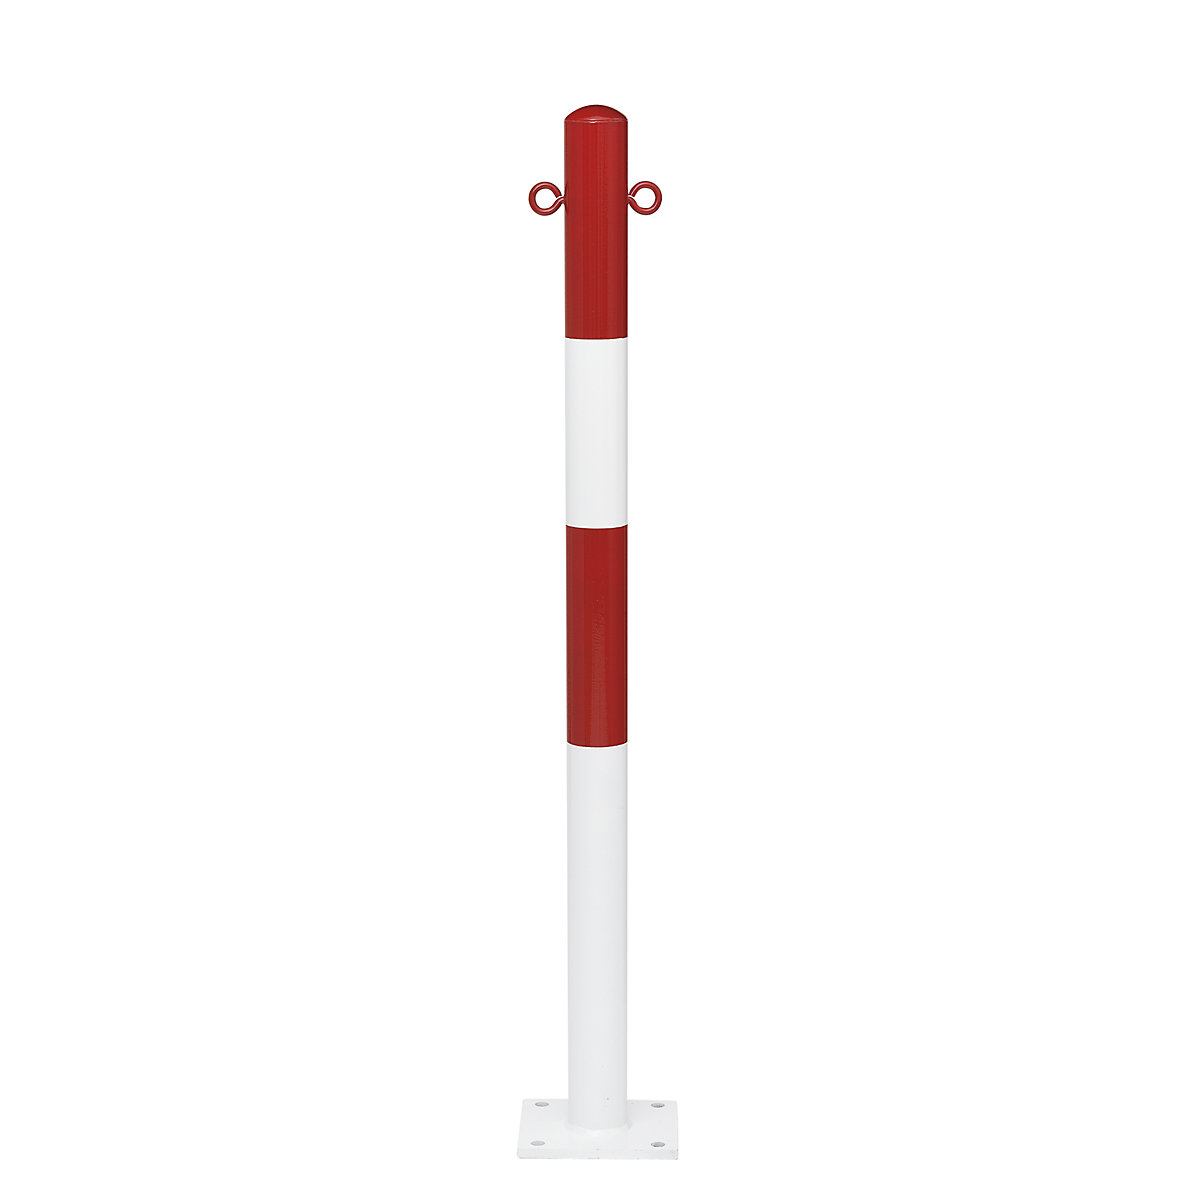 Barrier post, for bolting in place, Ø 76 mm, red/white plastic coated, 2 eyelets-7